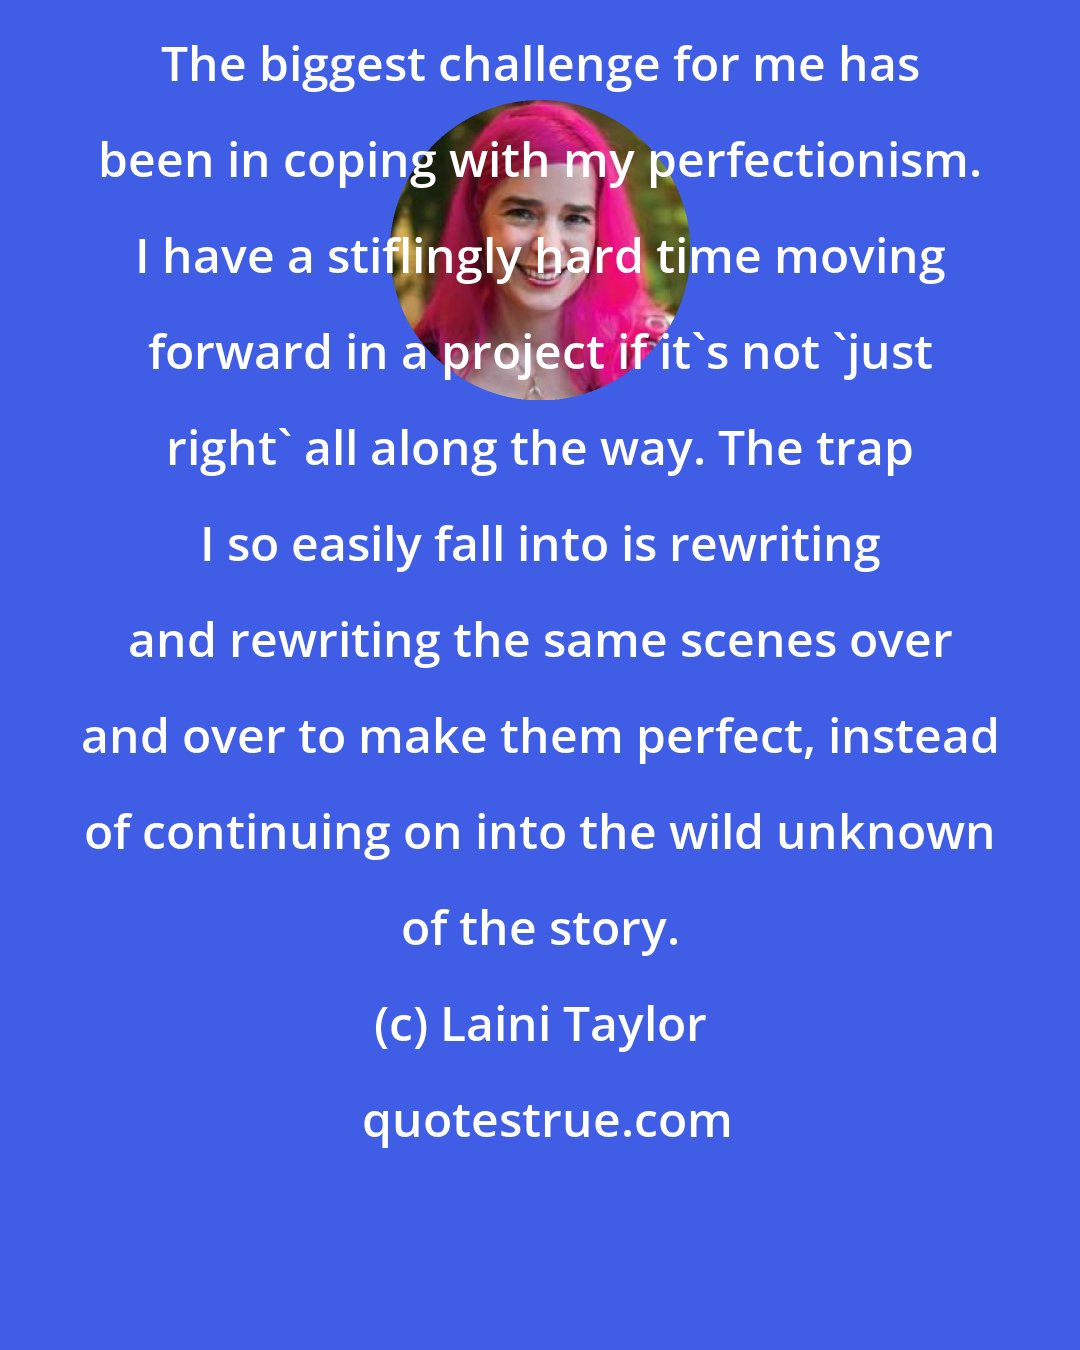 Laini Taylor: The biggest challenge for me has been in coping with my perfectionism. I have a stiflingly hard time moving forward in a project if it's not 'just right' all along the way. The trap I so easily fall into is rewriting and rewriting the same scenes over and over to make them perfect, instead of continuing on into the wild unknown of the story.